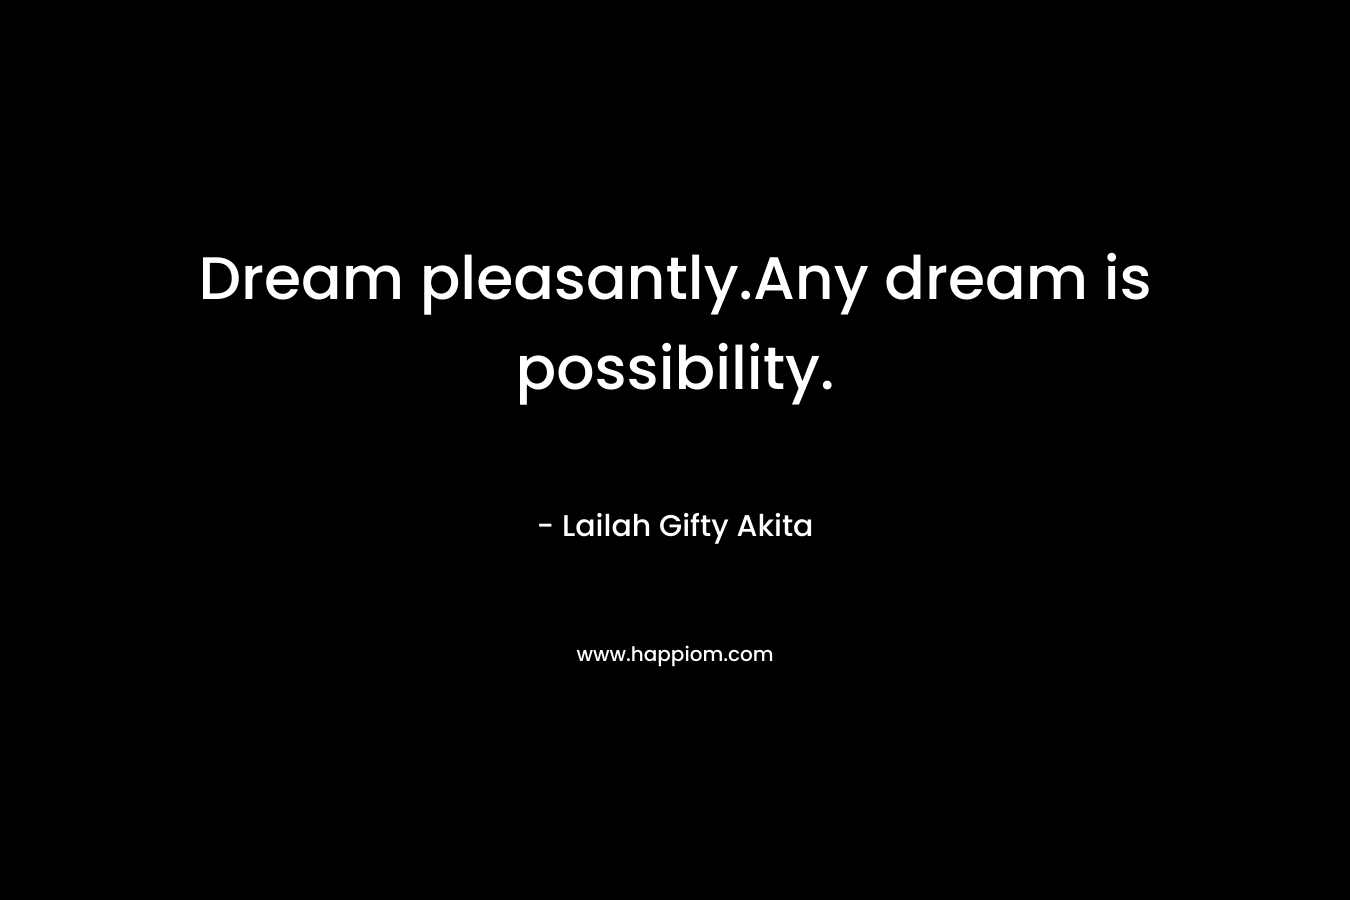 Dream pleasantly.Any dream is possibility.